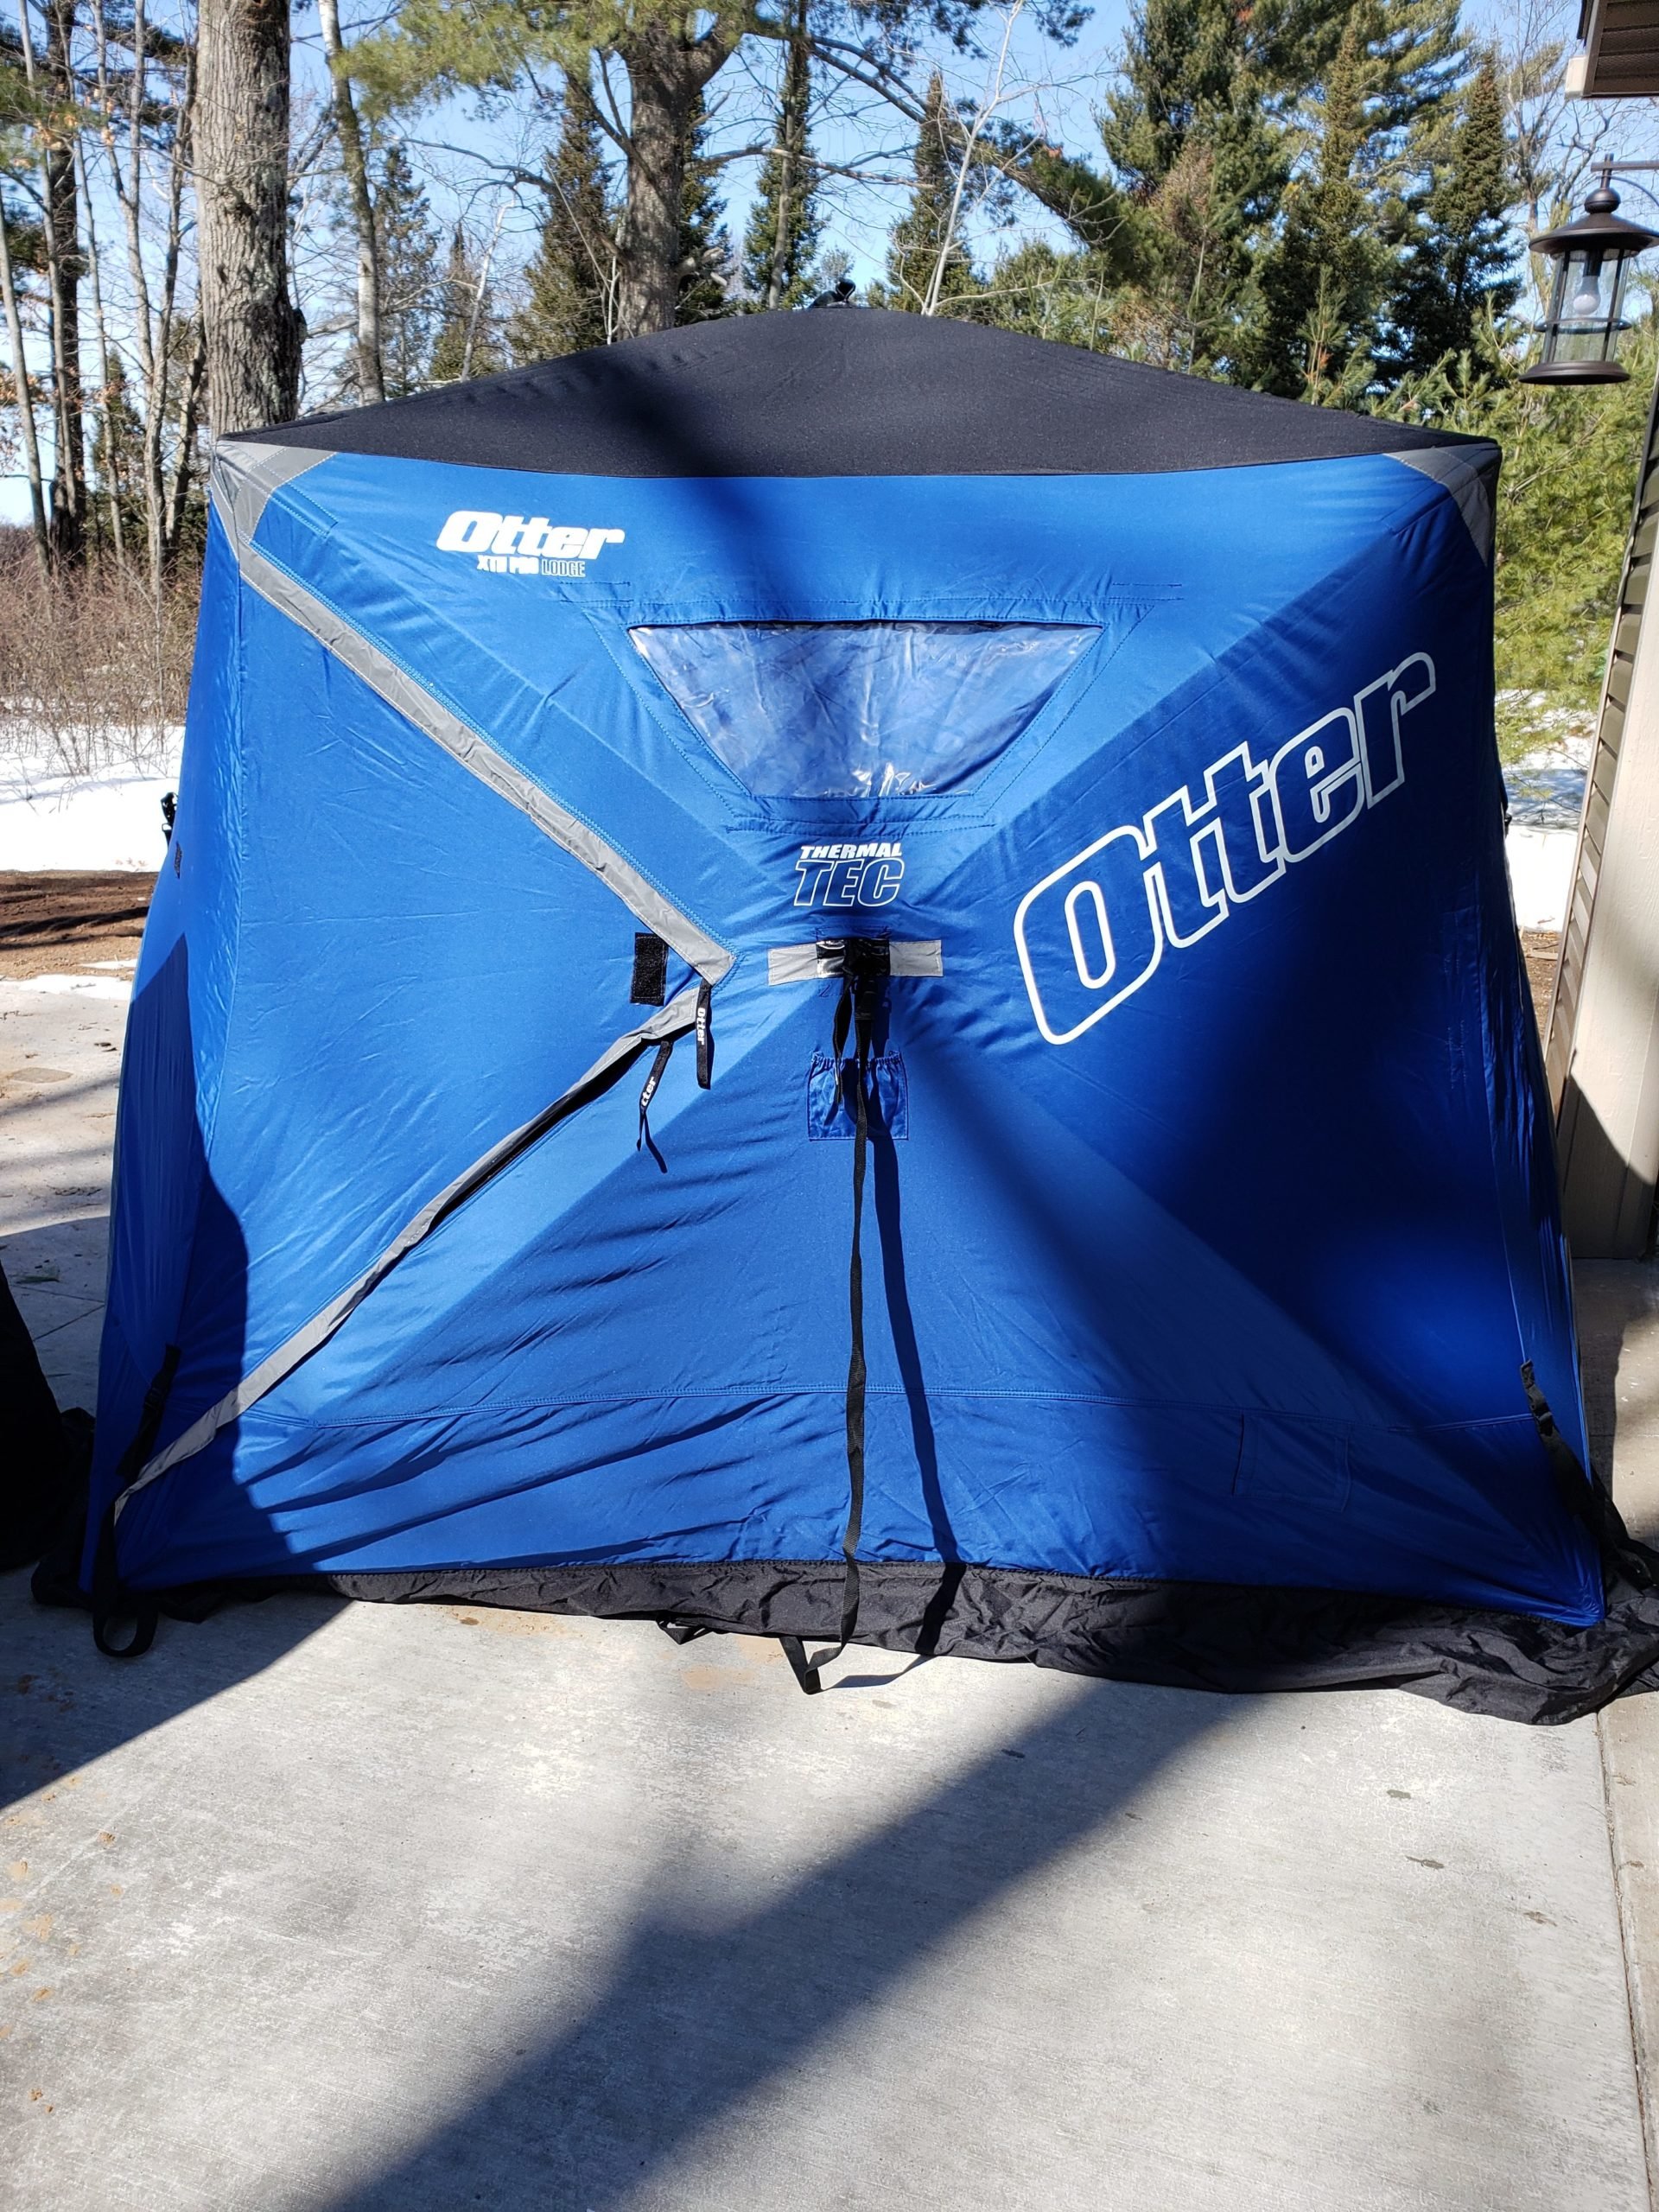 Otter XTH pro lodge insulated hub shelter and Otter Pro series Magnum size  sled - Classified Ads - Classified Ads